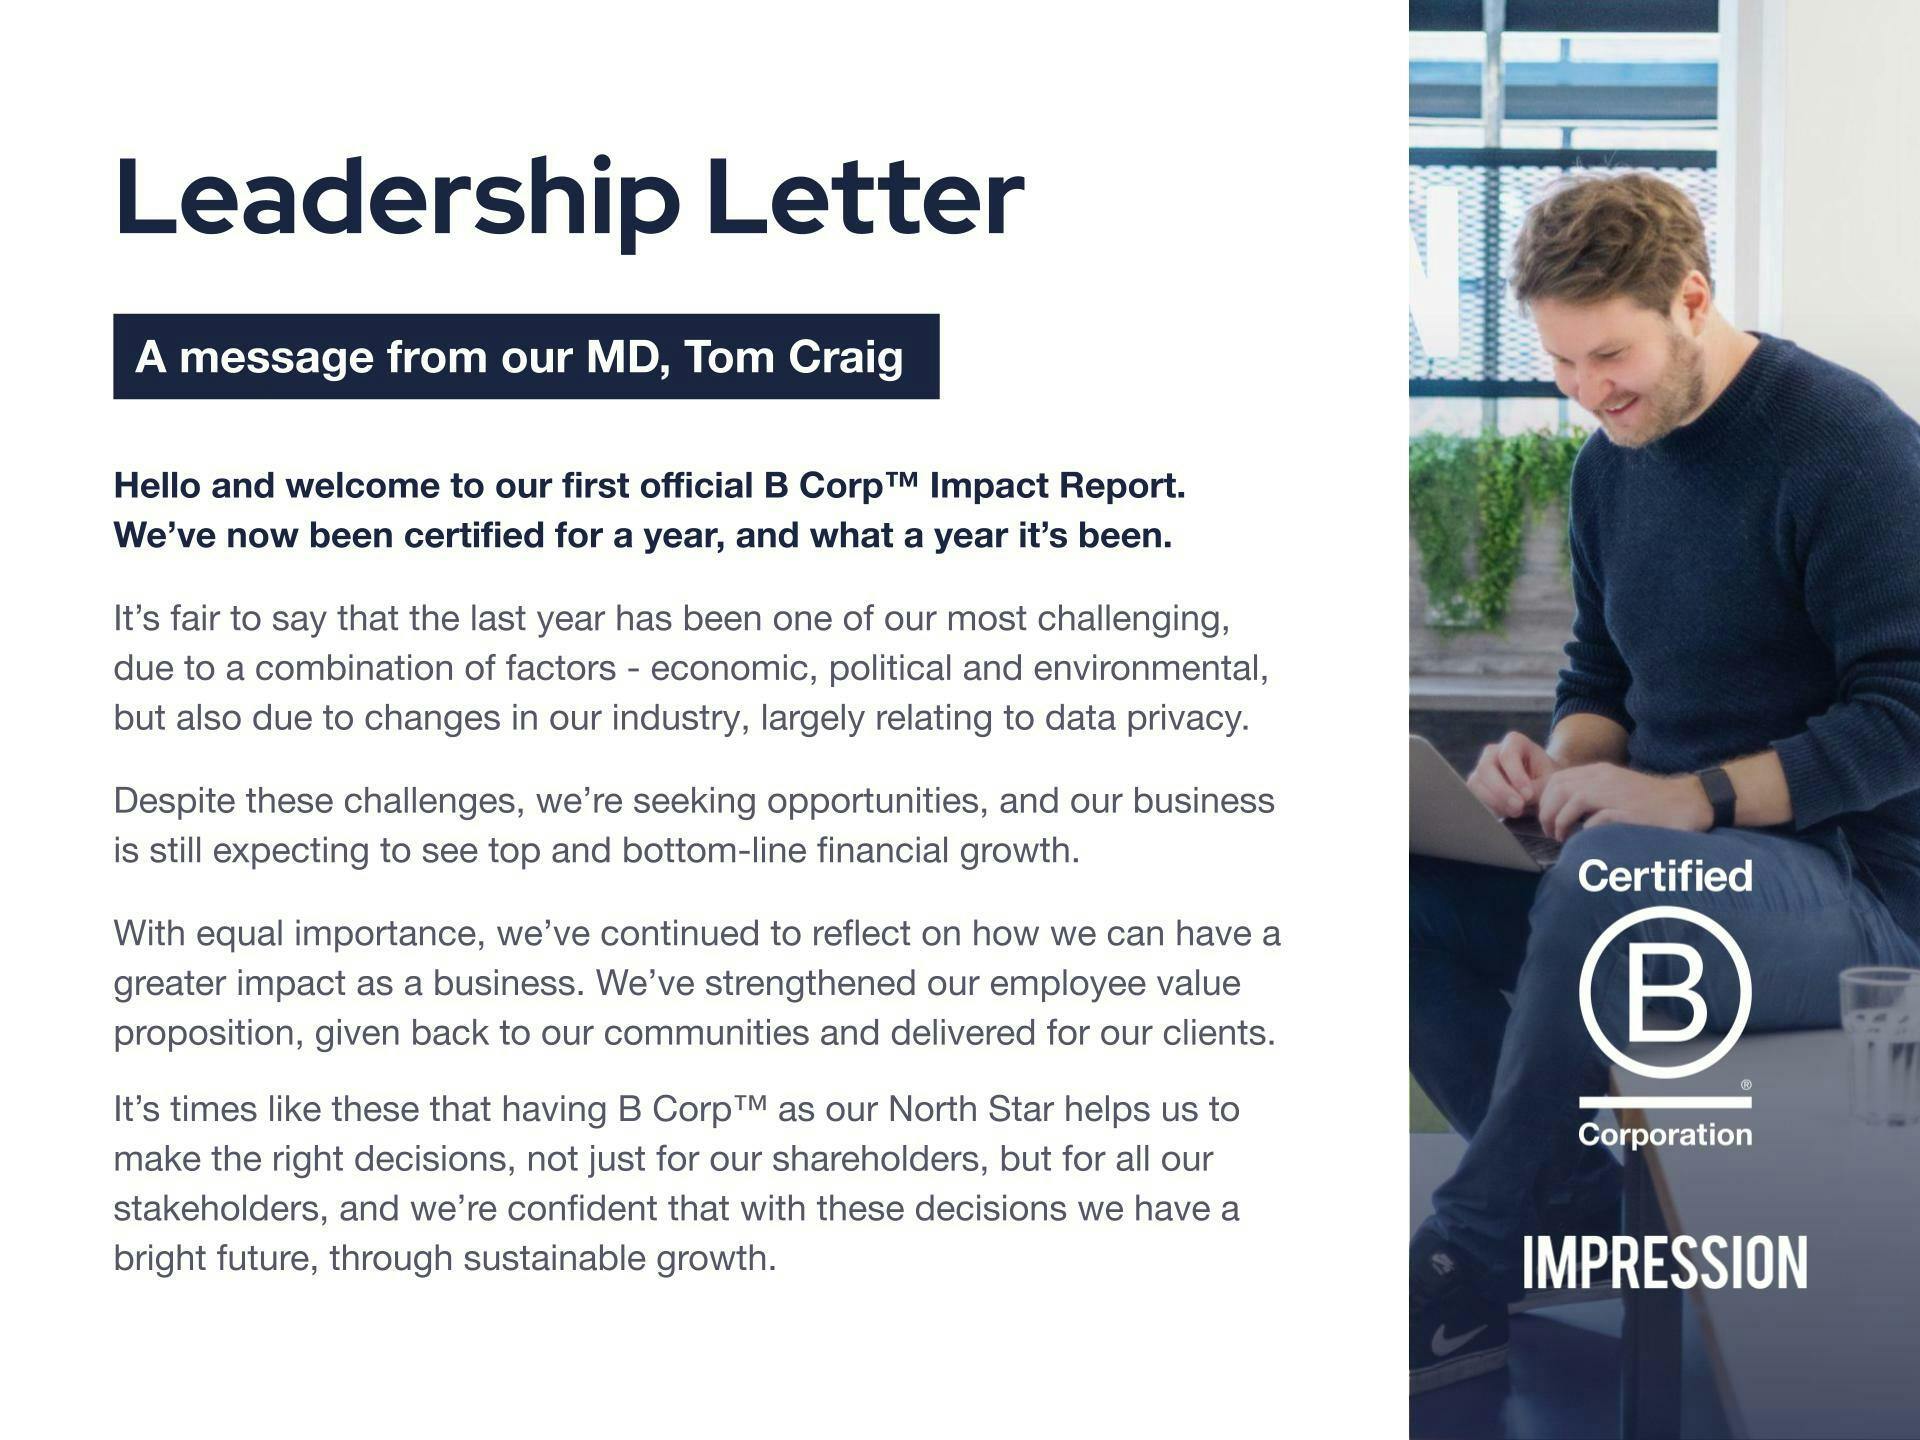 Leadership letter. A message from our MD, Tom Craig. Hello and welcome to our first official B Corp Impact Report. We've not been certified for a year, and what a year it's been. It's fair to say that the last year has been one of our most challenging due to a combination of factors - economic, political and environmental, but also due to changes in our industry, largely relating to data privacy. Despite these challenges, we're seeking opportunities and our business is still expecting to see top and bottom-line financial growth. With equal importance, we've continued to reflect on how we can have a greater impact as a business. We've strengthened our employee value proposition, given back to our communities and delivered for our clients. It's times like these that having B Corp as our North Star helps us to make the right decisions, not just for our shareholders, but for all our stakeholders, and we're confident that these decisions we have a bright future, through sustainable growth.